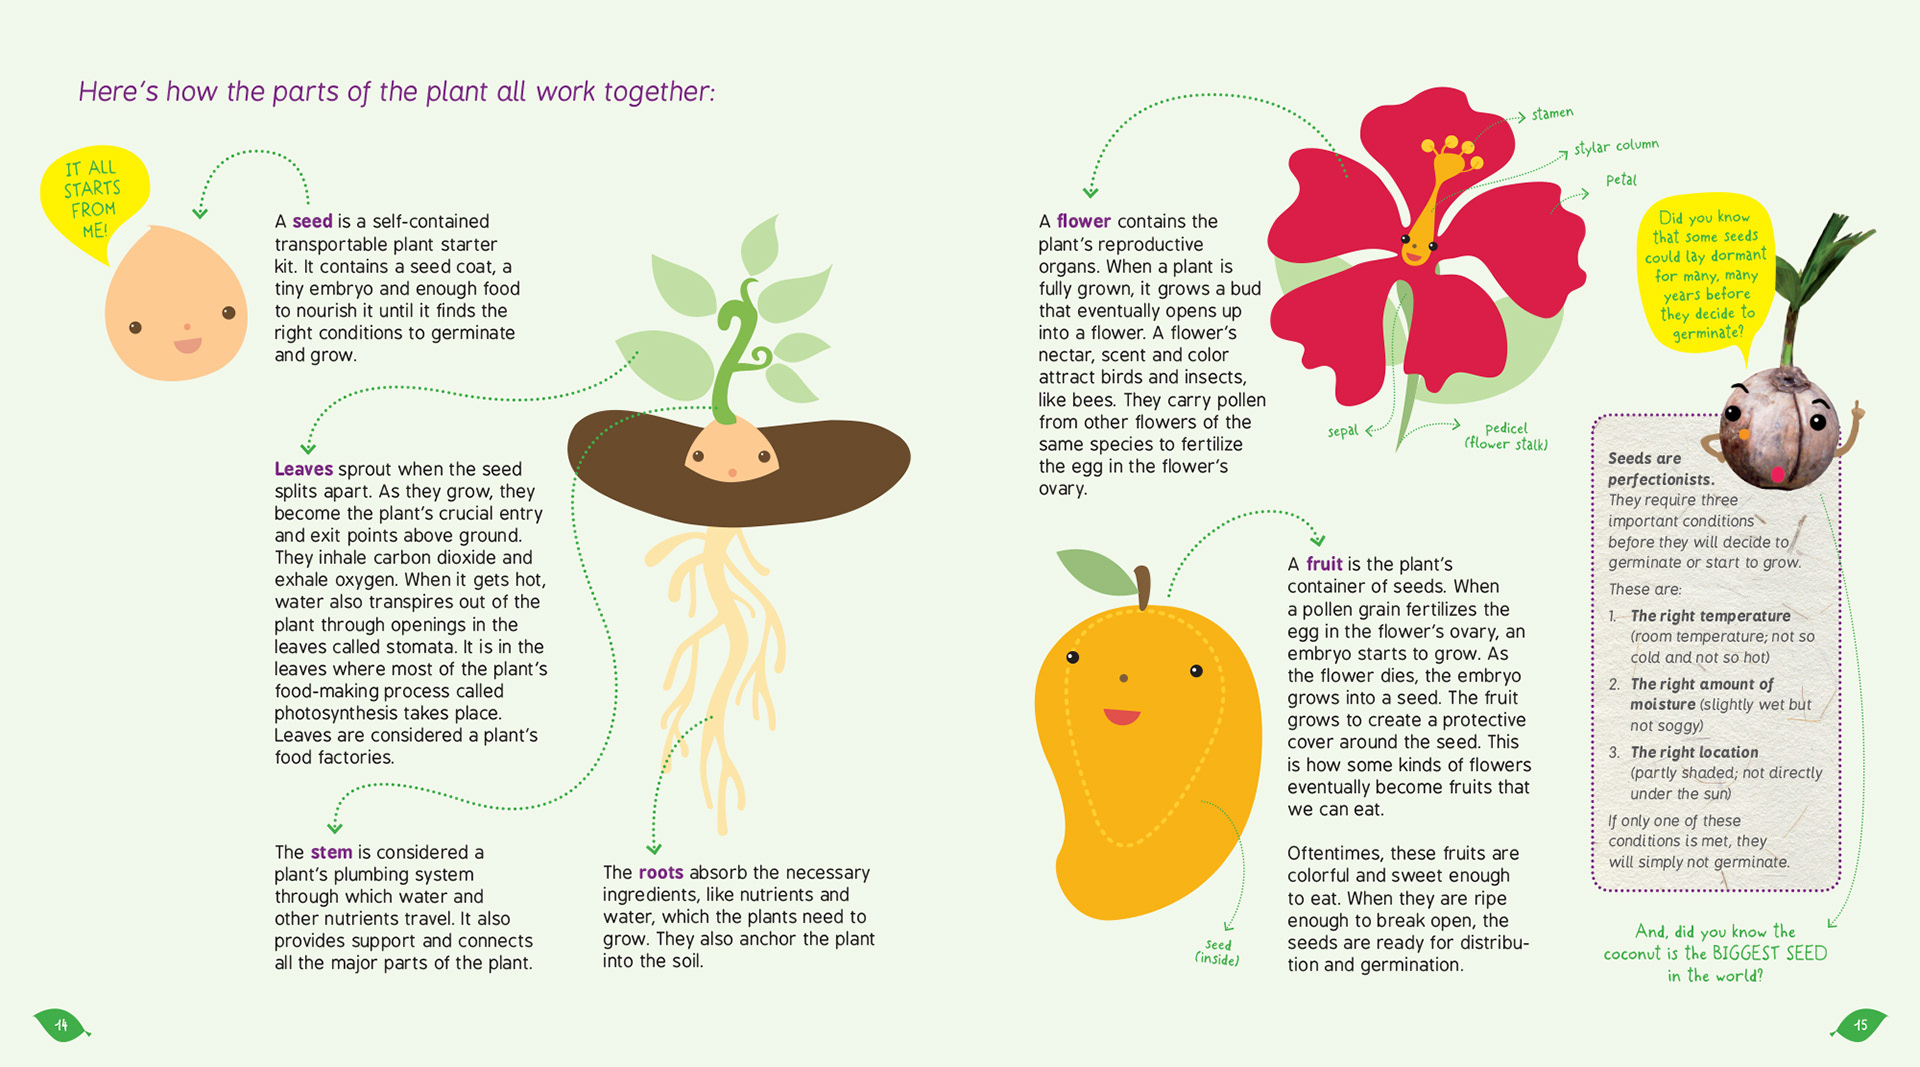 The fruits are together перевод. Parts of a Seed Plant. How do Plants grow. How to grow a Plant. How to grow a Seed into a Plant.